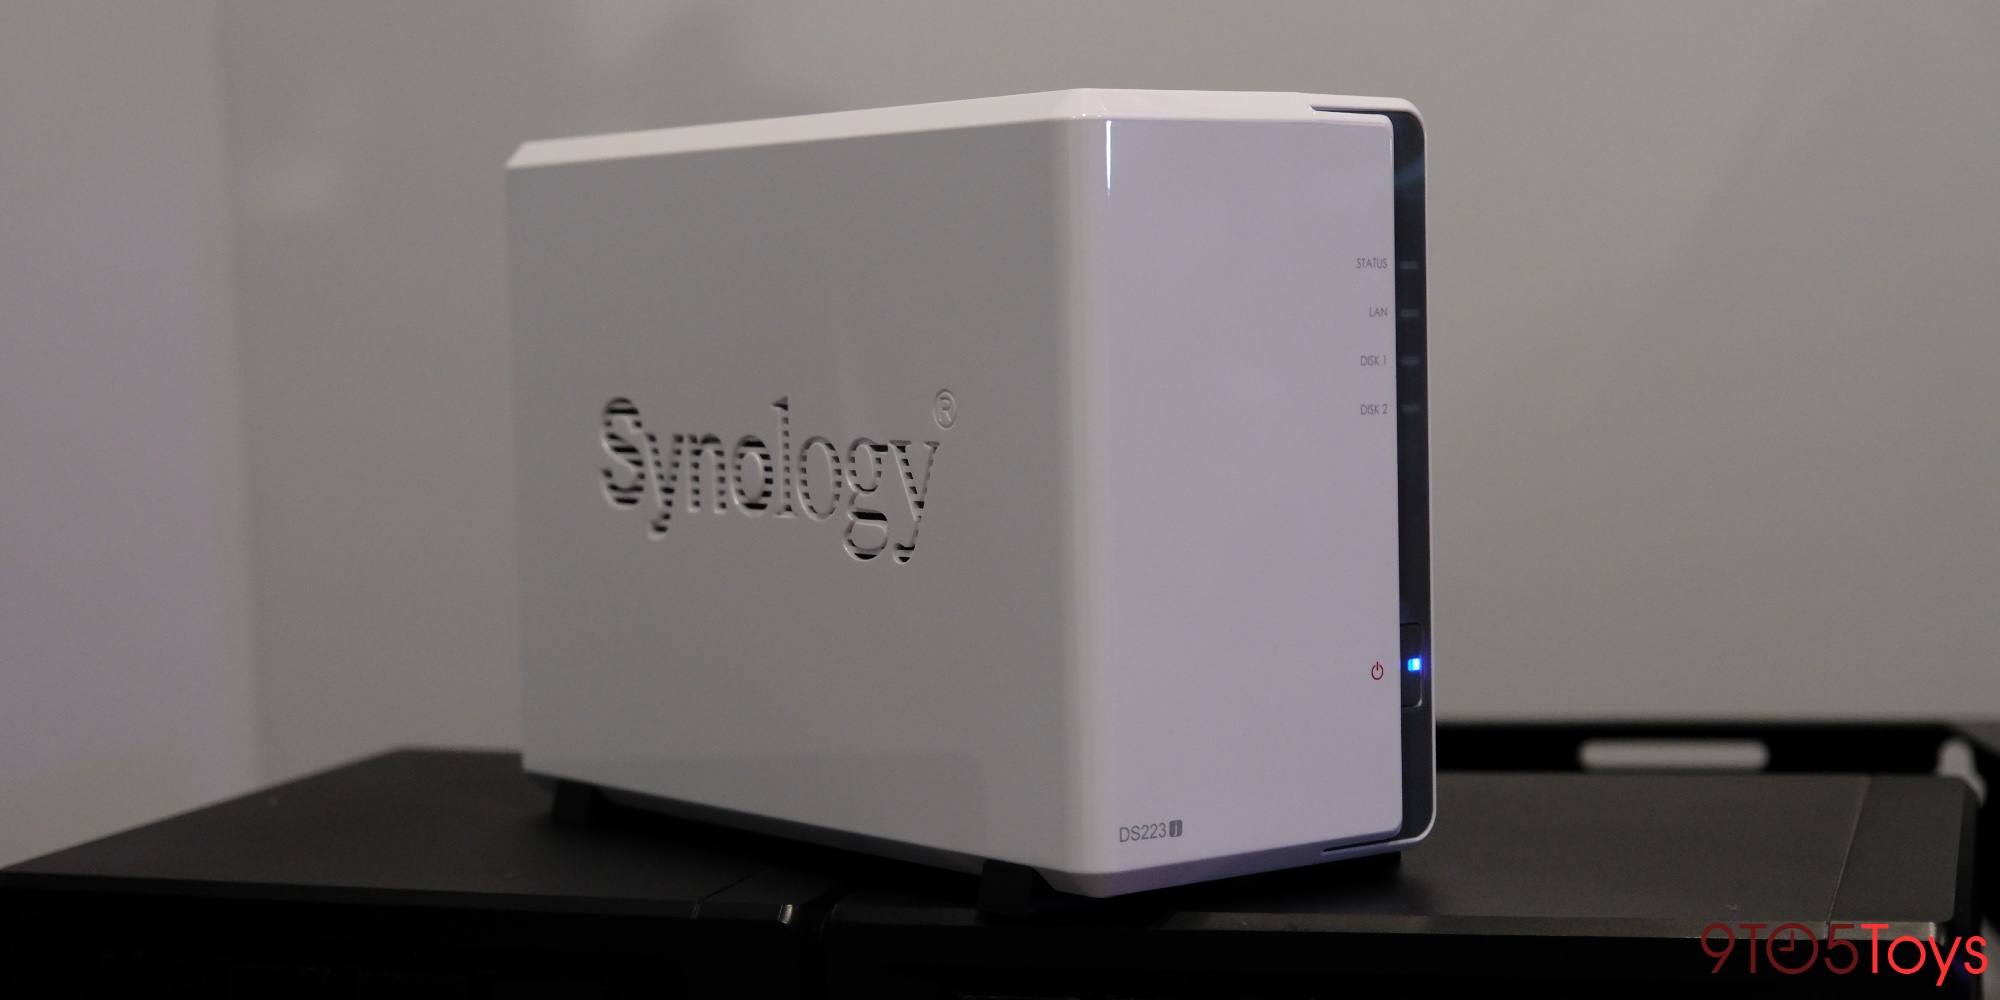 Synology's new DS223j 2-bay NAS sees first discount to $155 (Reg